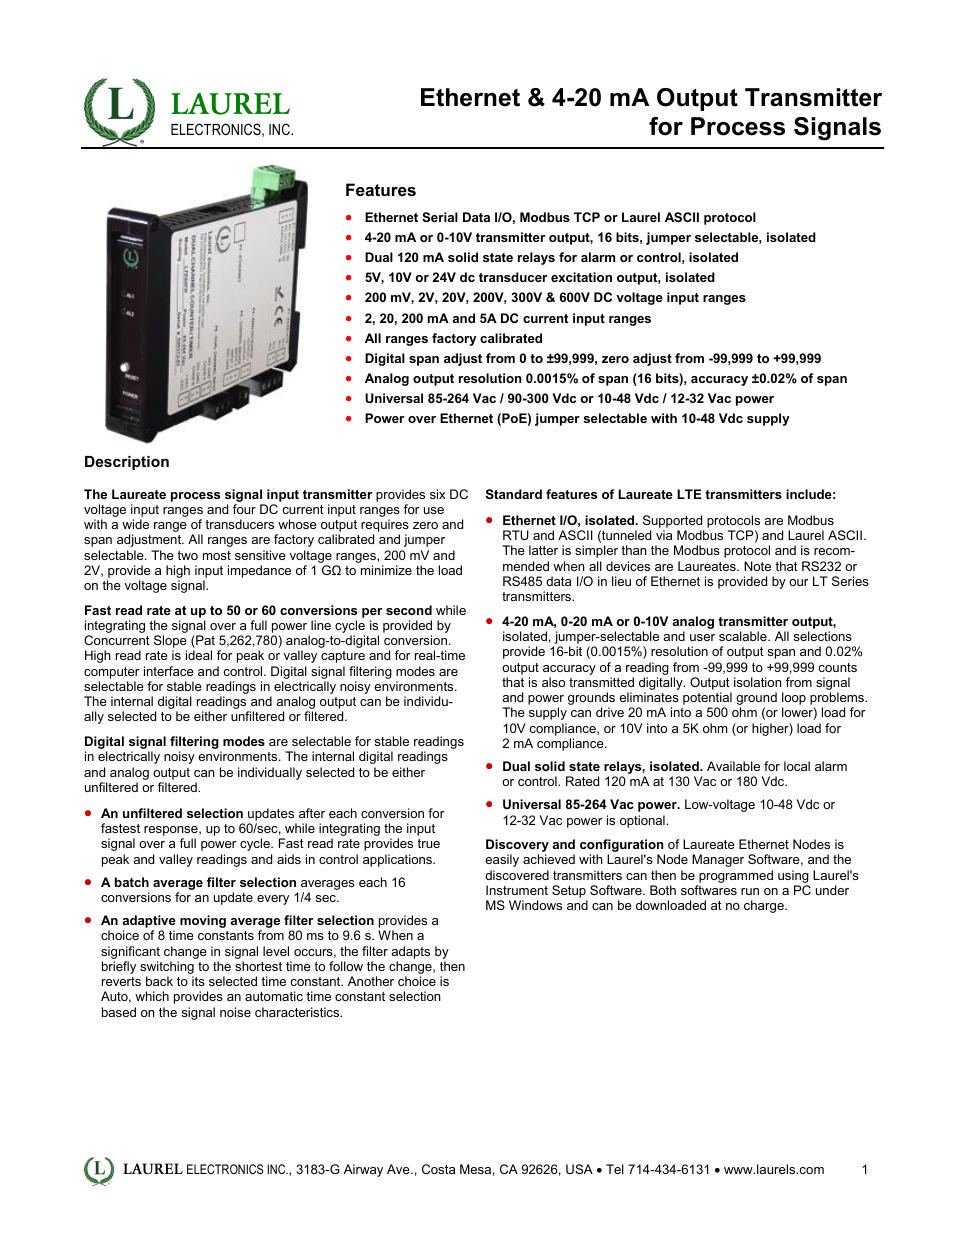 LTE: Ethernet & 4-20 mA Output Transmitter for Process Signals